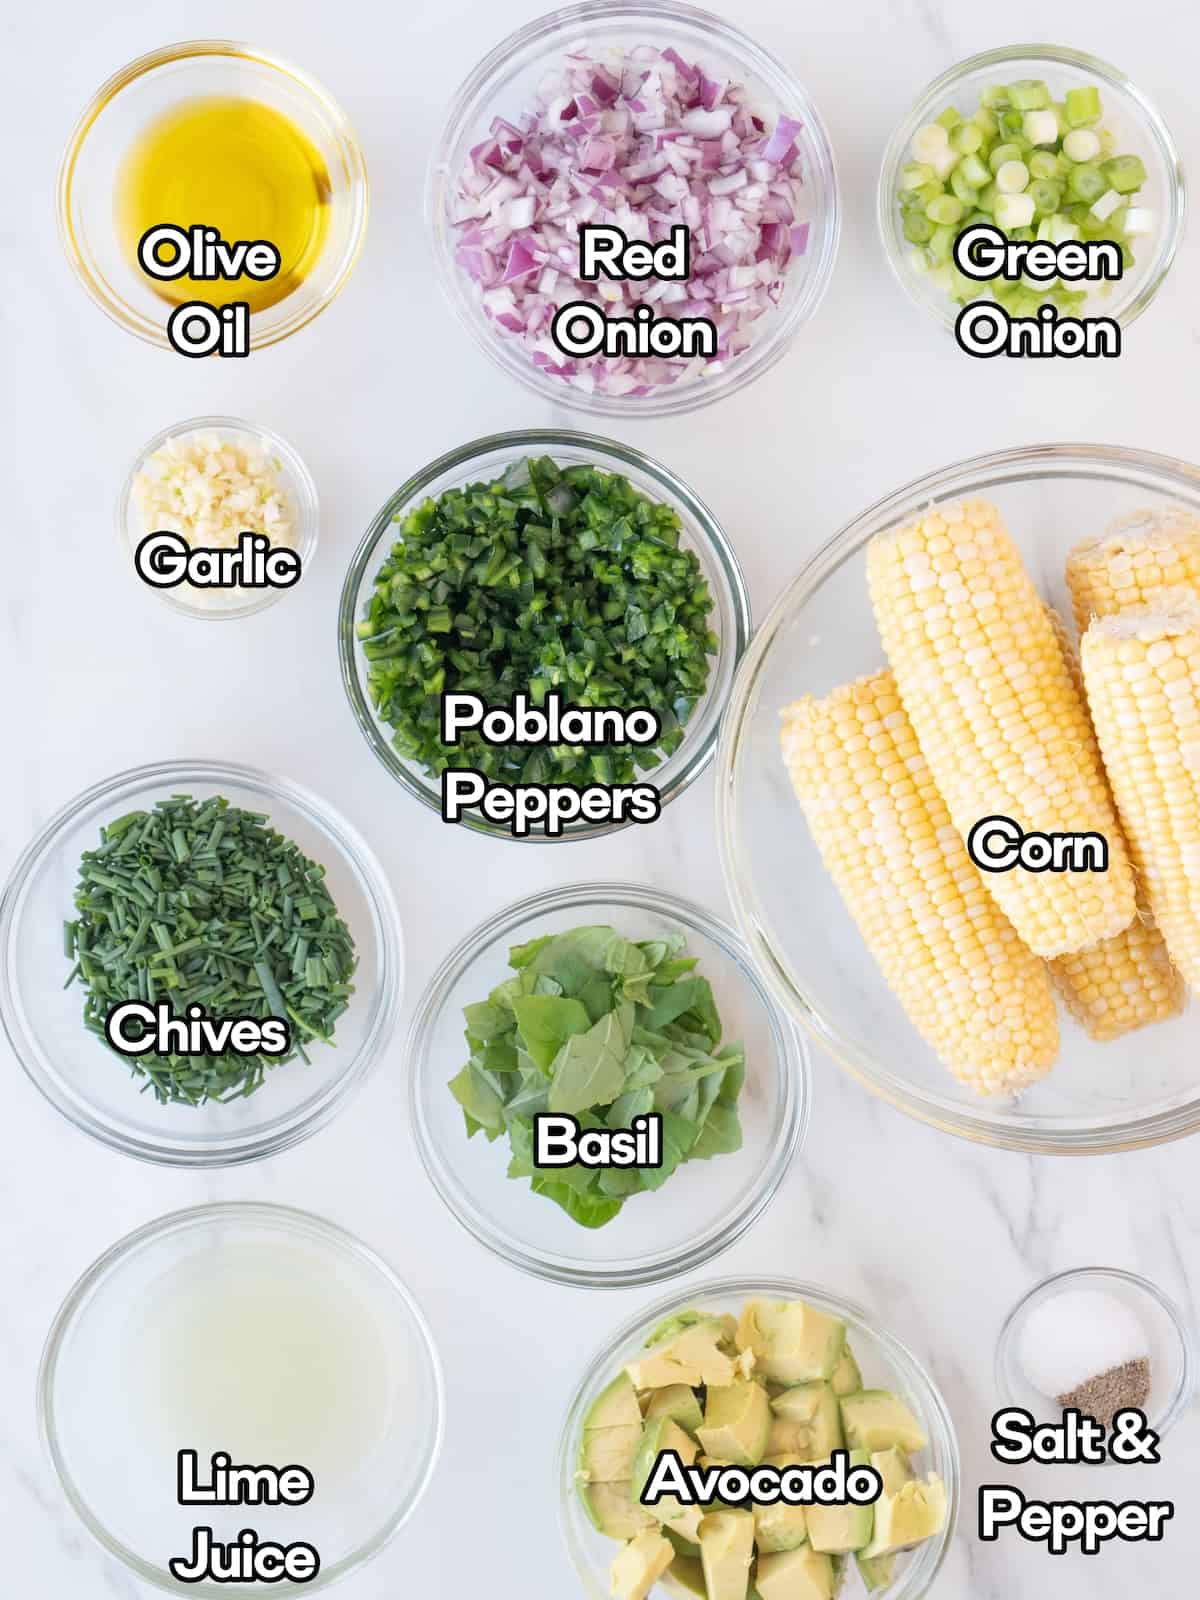 Mise en place of all the ingredients to make Avocado Corn Salad